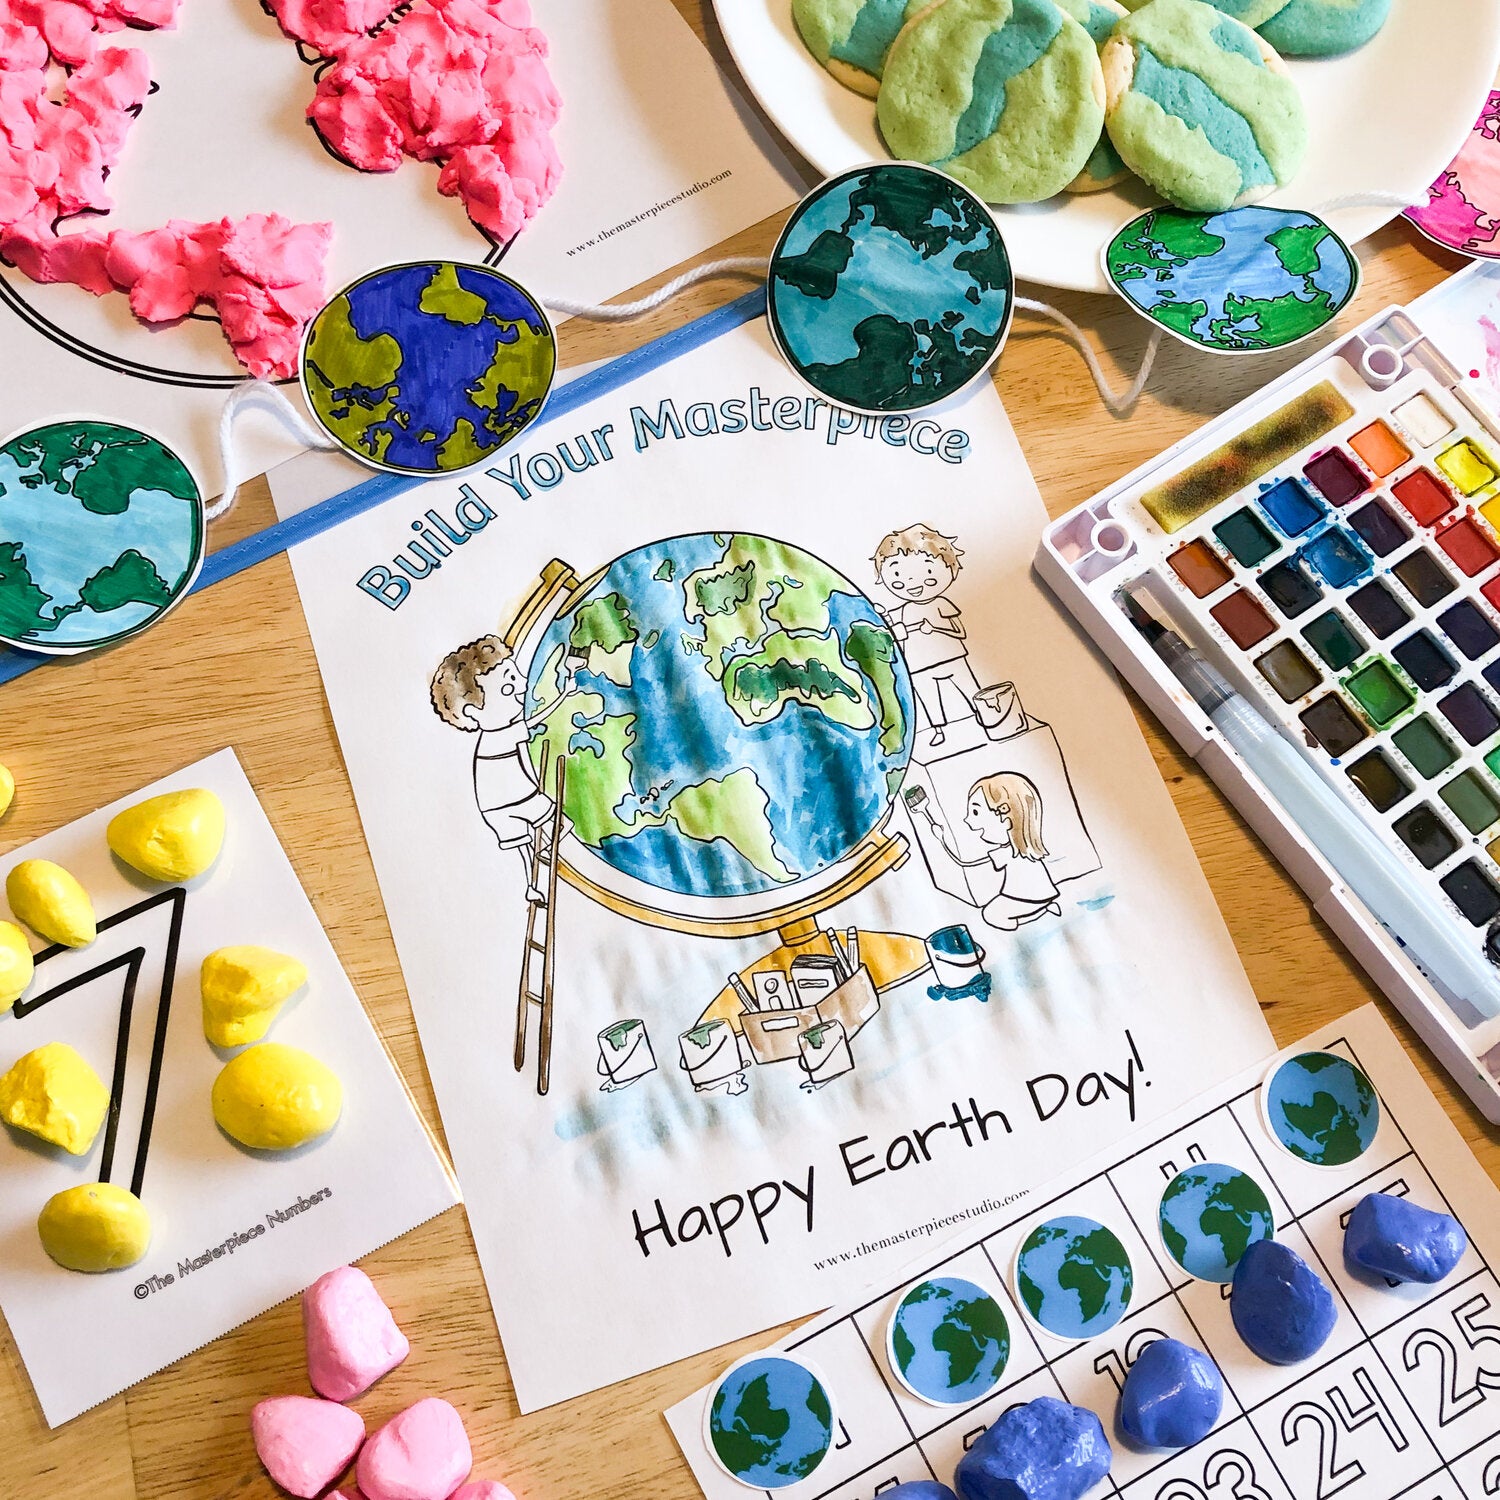 Earth Day Learning Pack